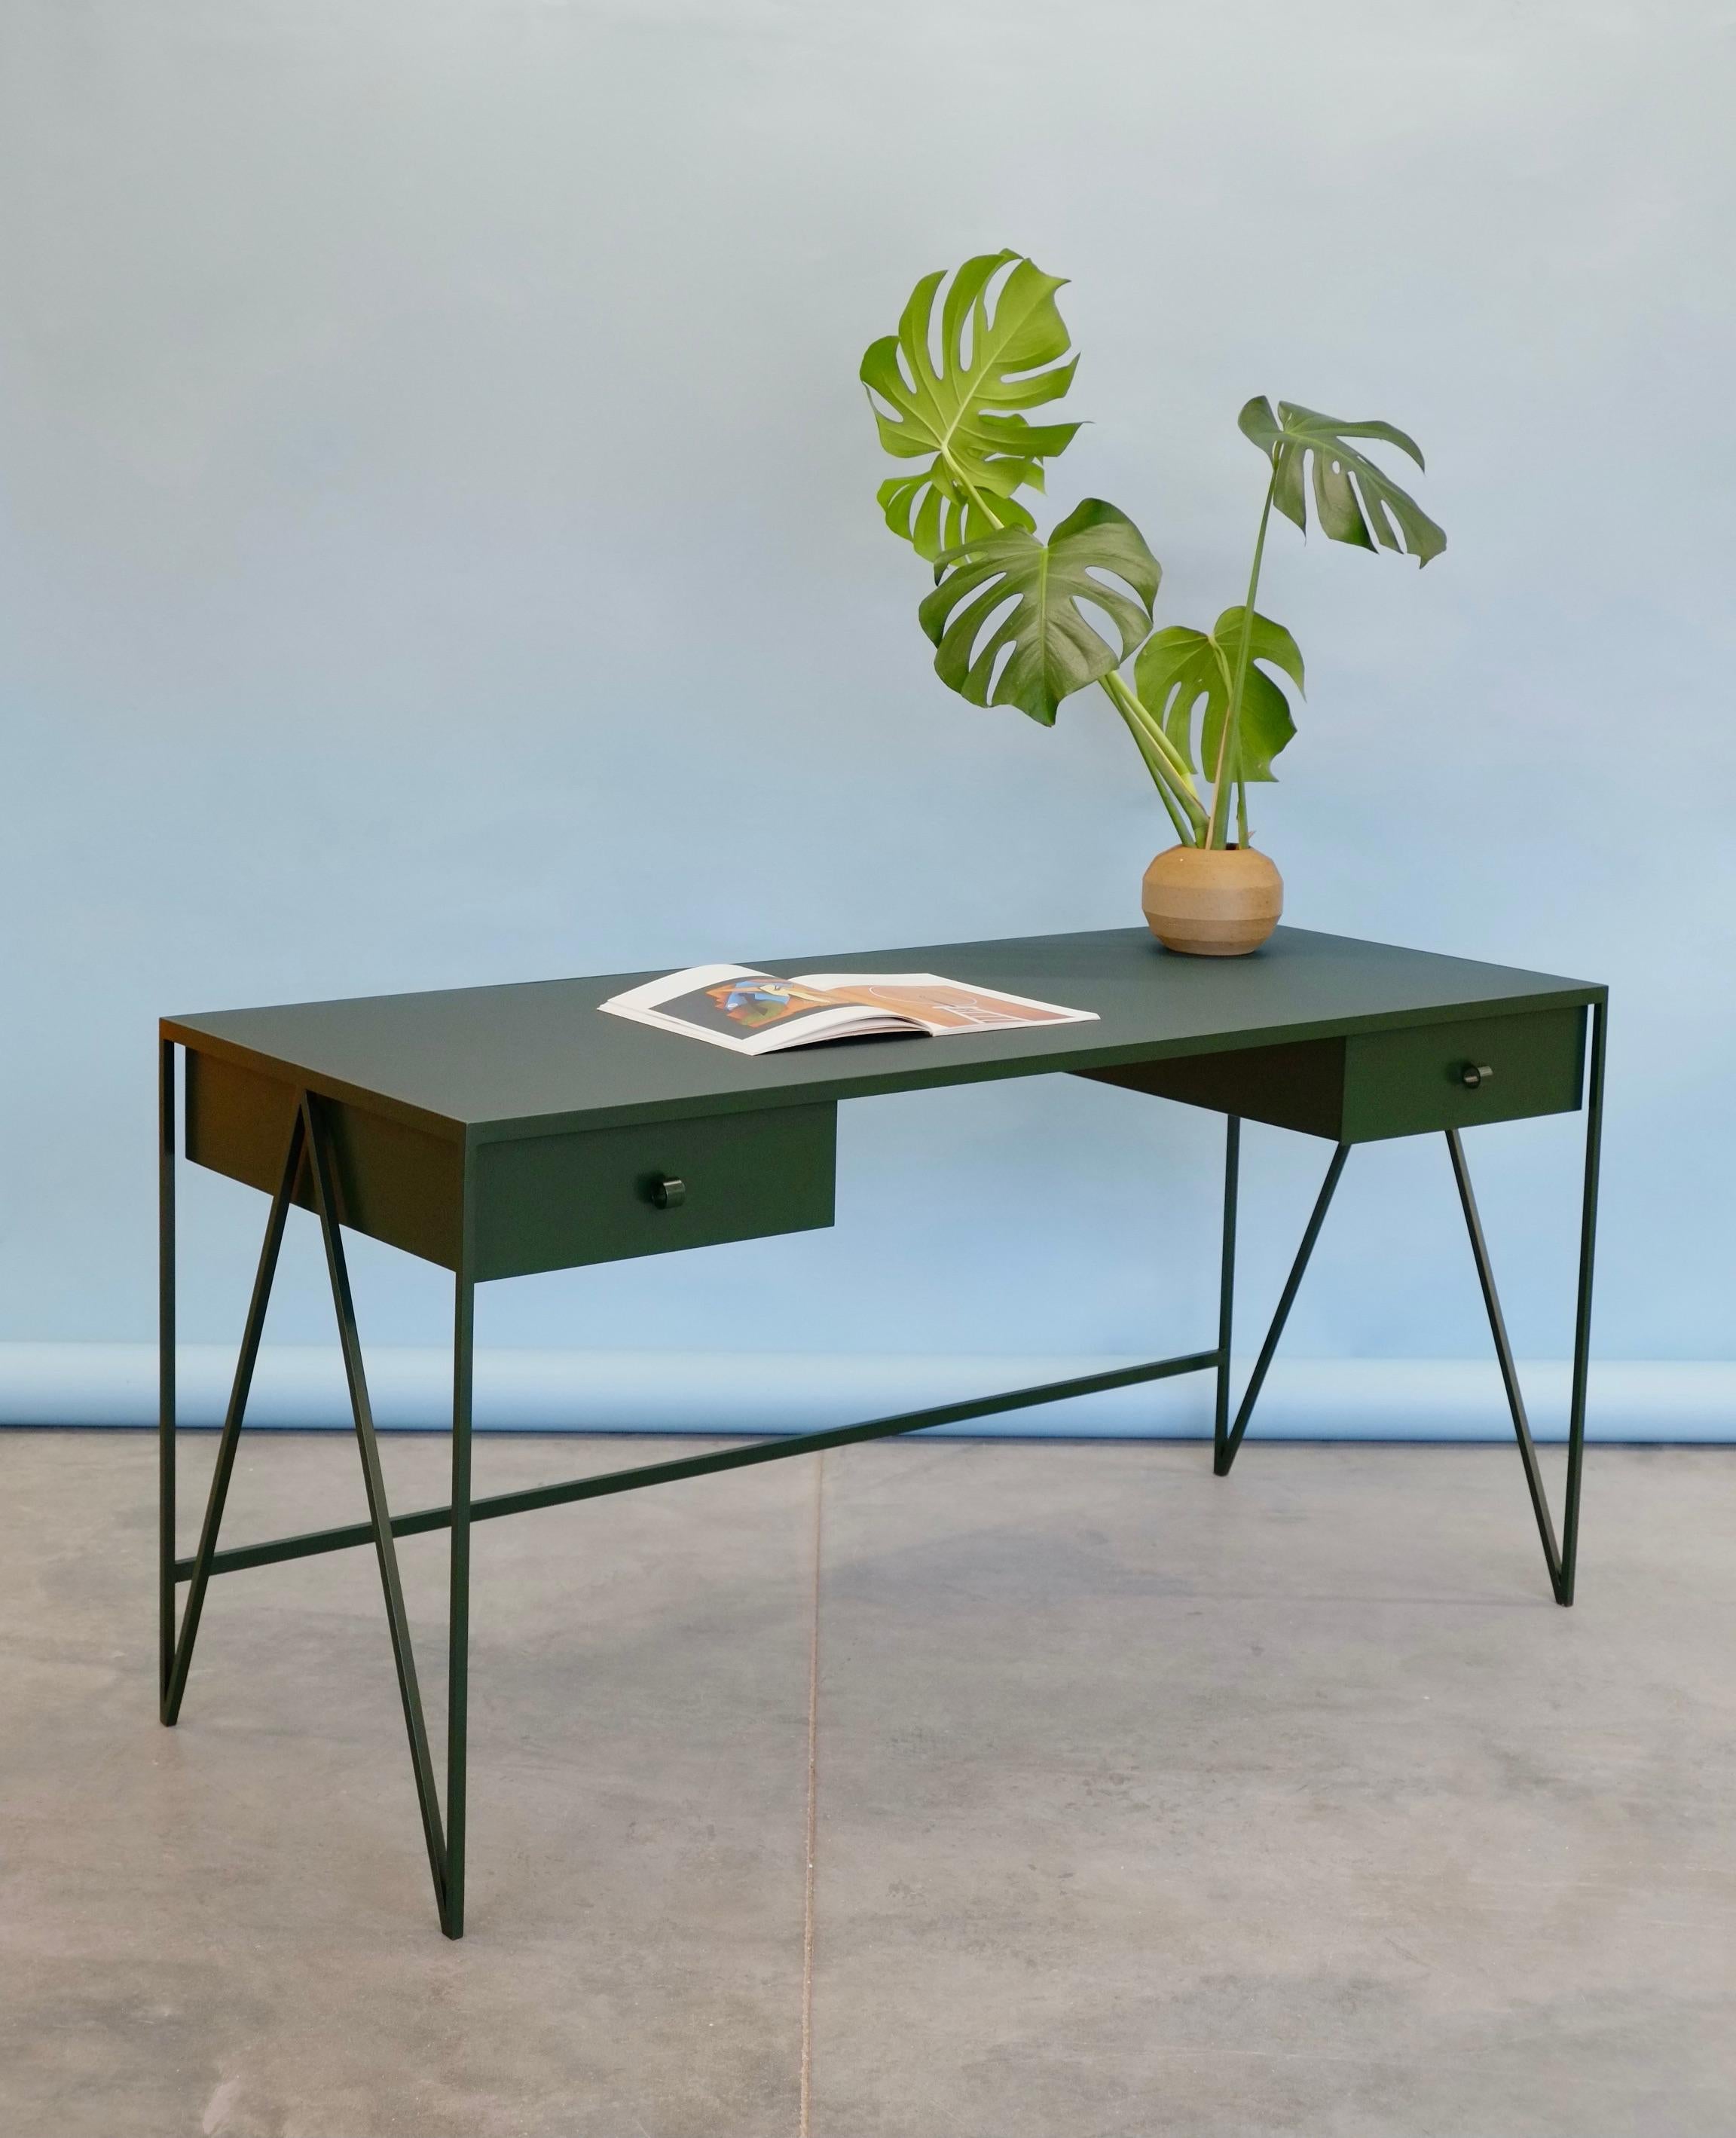 This large deep green study desk is made with a powder coated steel frame and a beautiful natural linoleum top made out of linseed oil. This modern minimal desk has two steel drawers suspended underneath the tabletop with our Loop handles. The deep